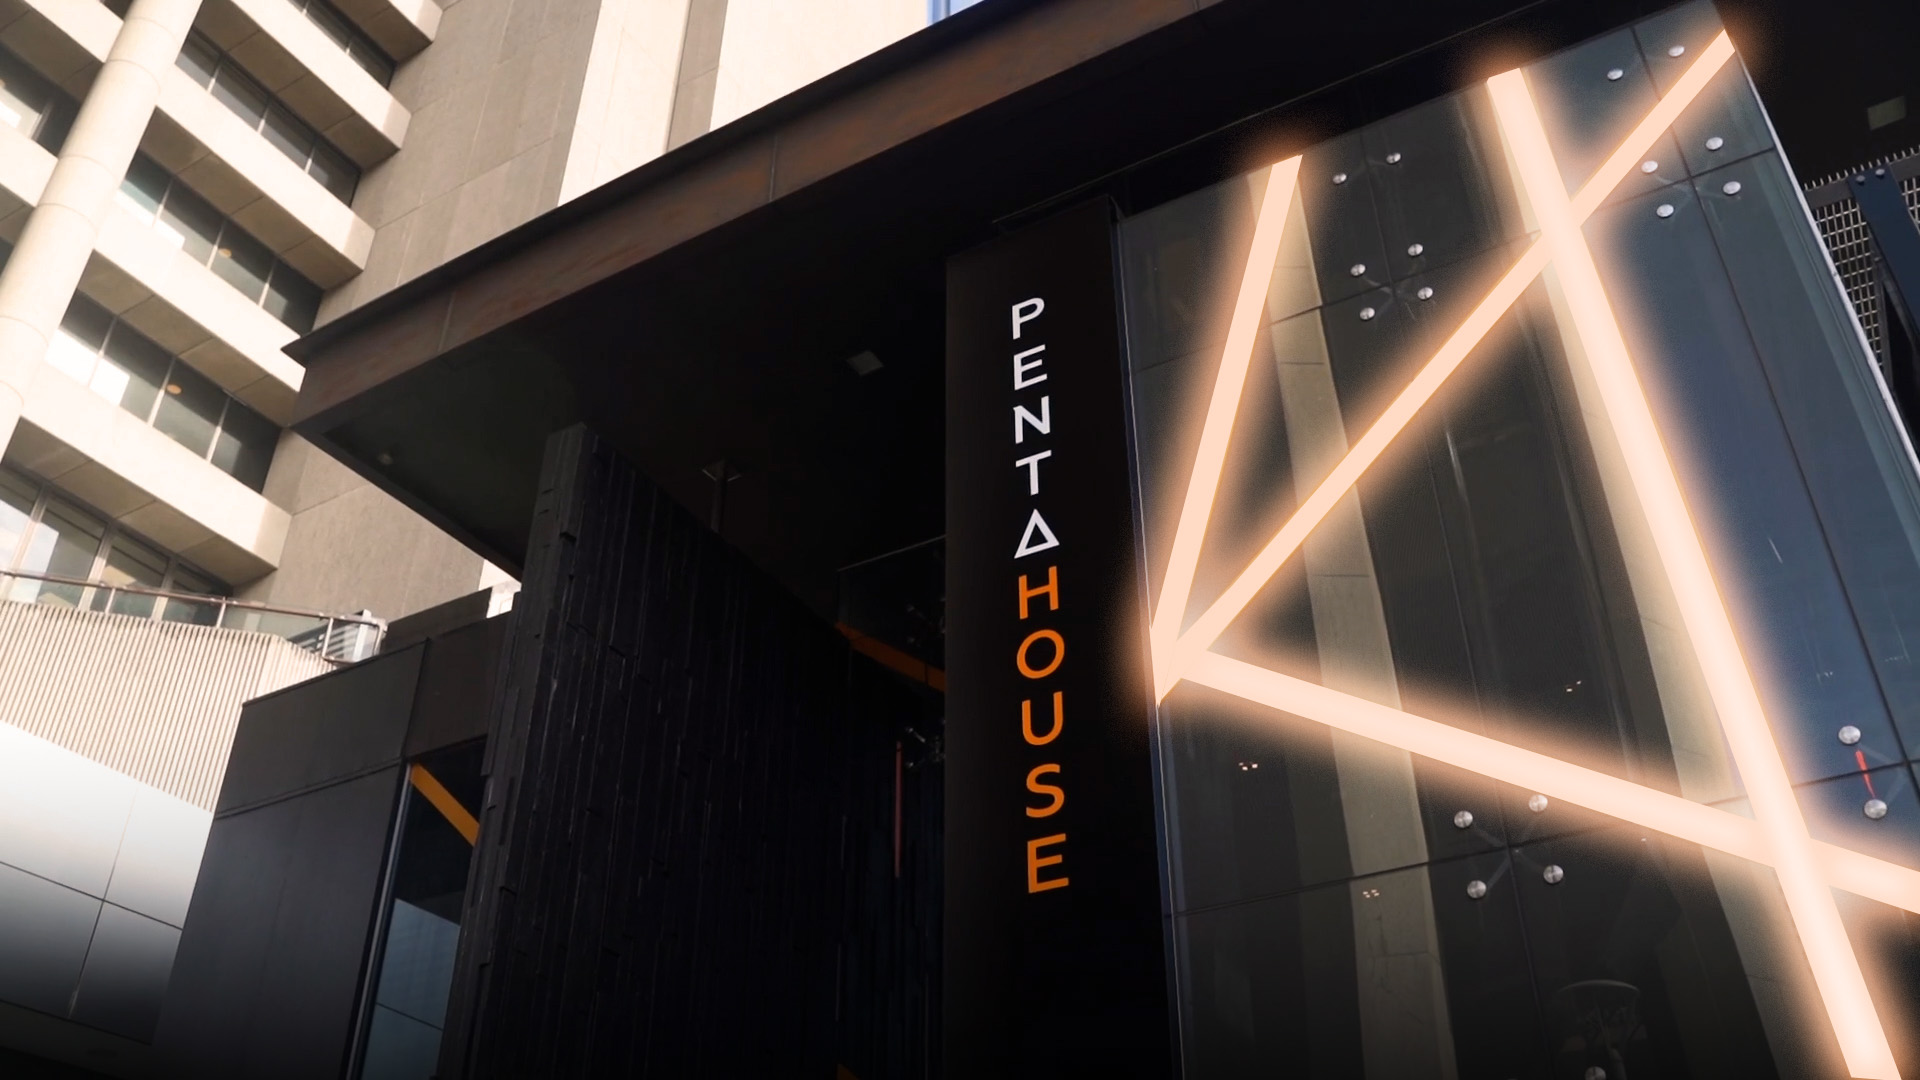 Building with glowing neon lines and Pentahouse logo running vertically down it